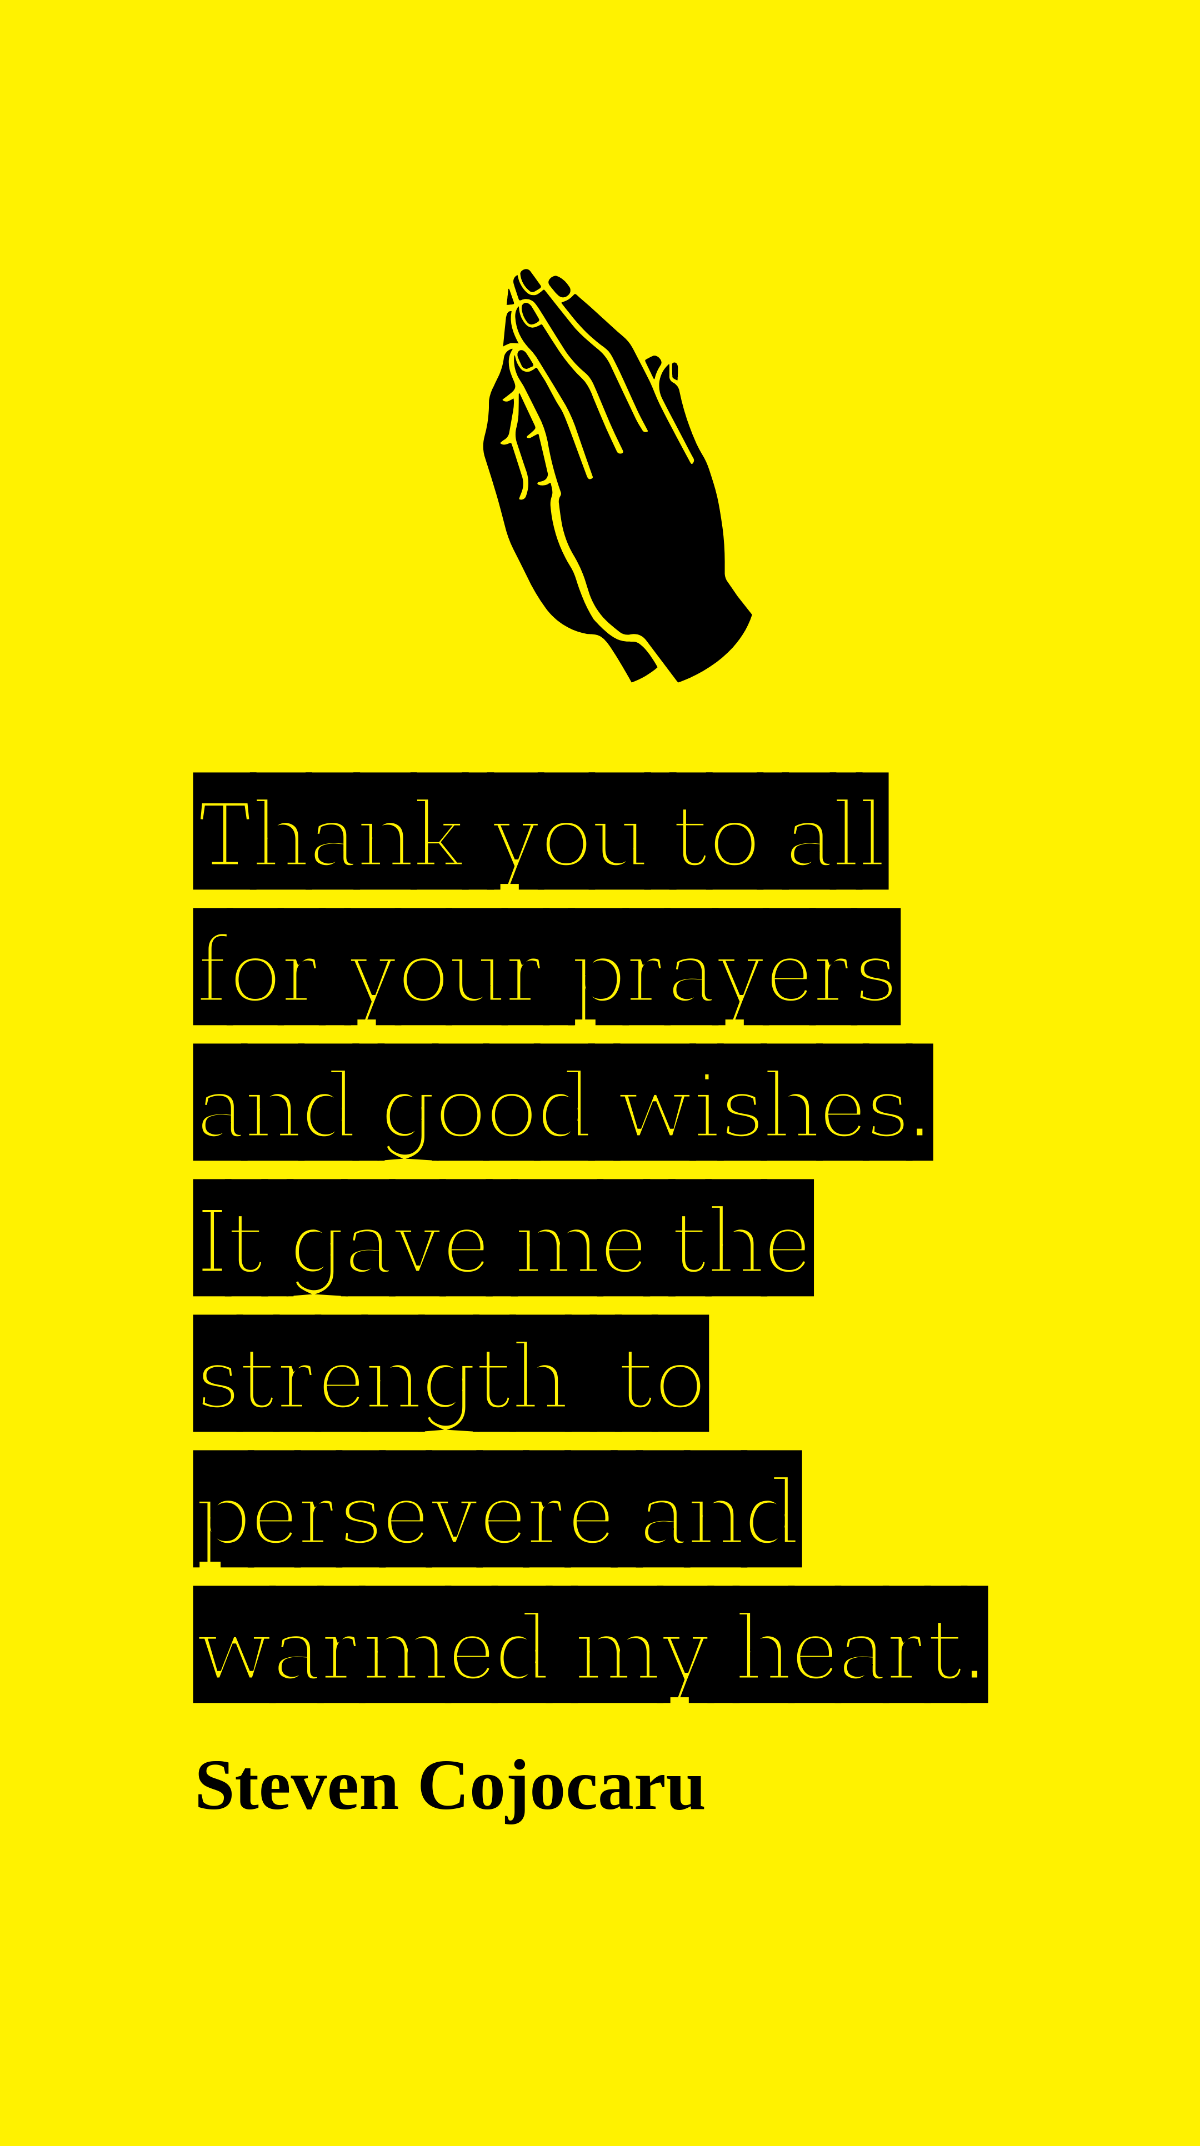 Steven Cojocaru - Thank you to all for your prayers and good wishes. It gave me the strength to persevere and warmed my heart. Template